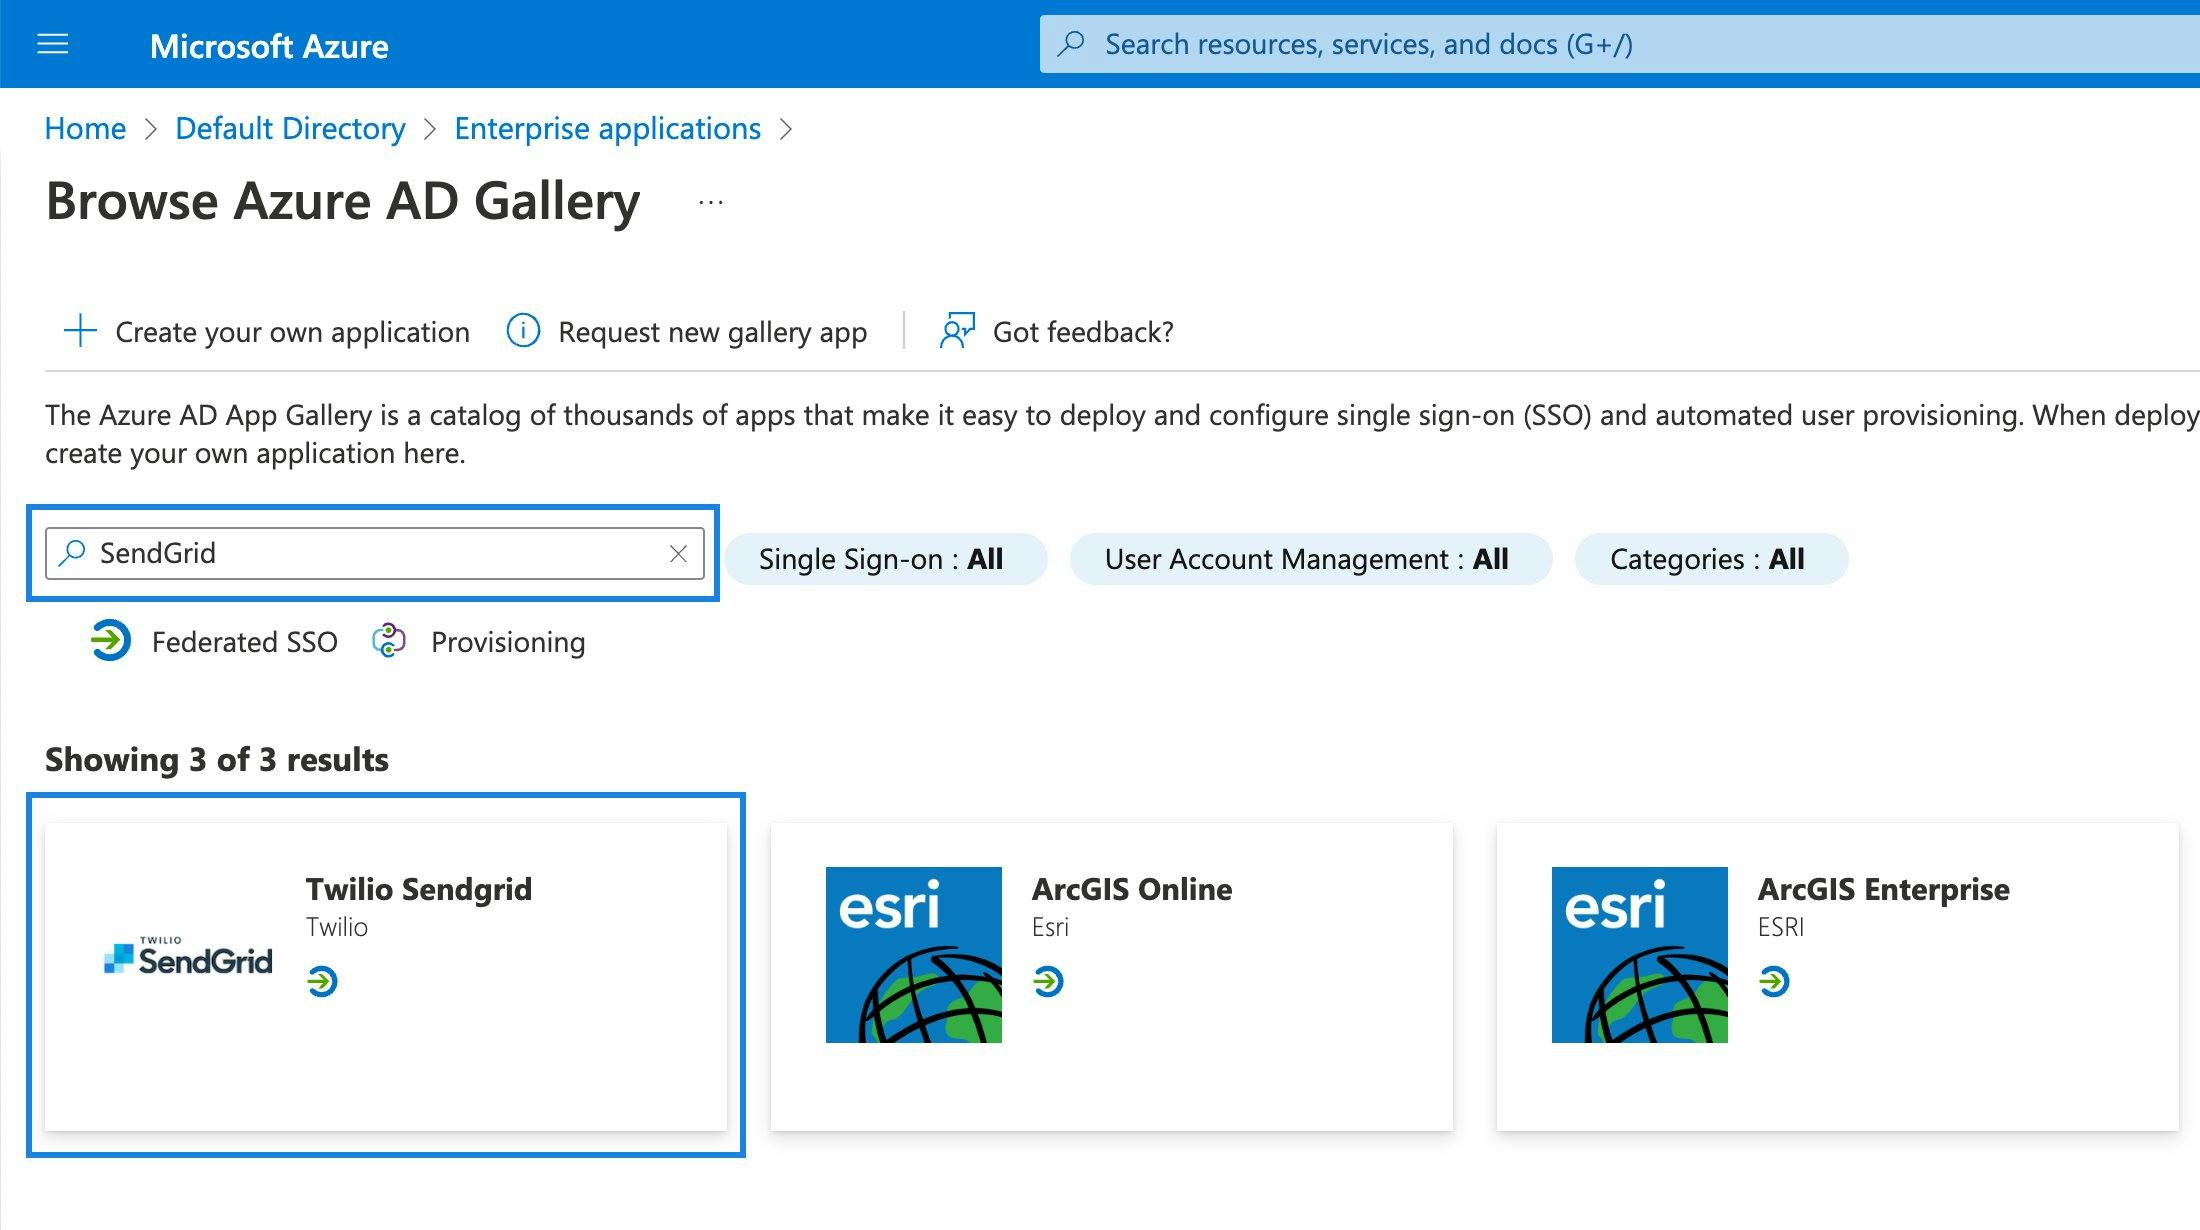 Search and select Twilio SendGrid in the Azure AD Gallery.